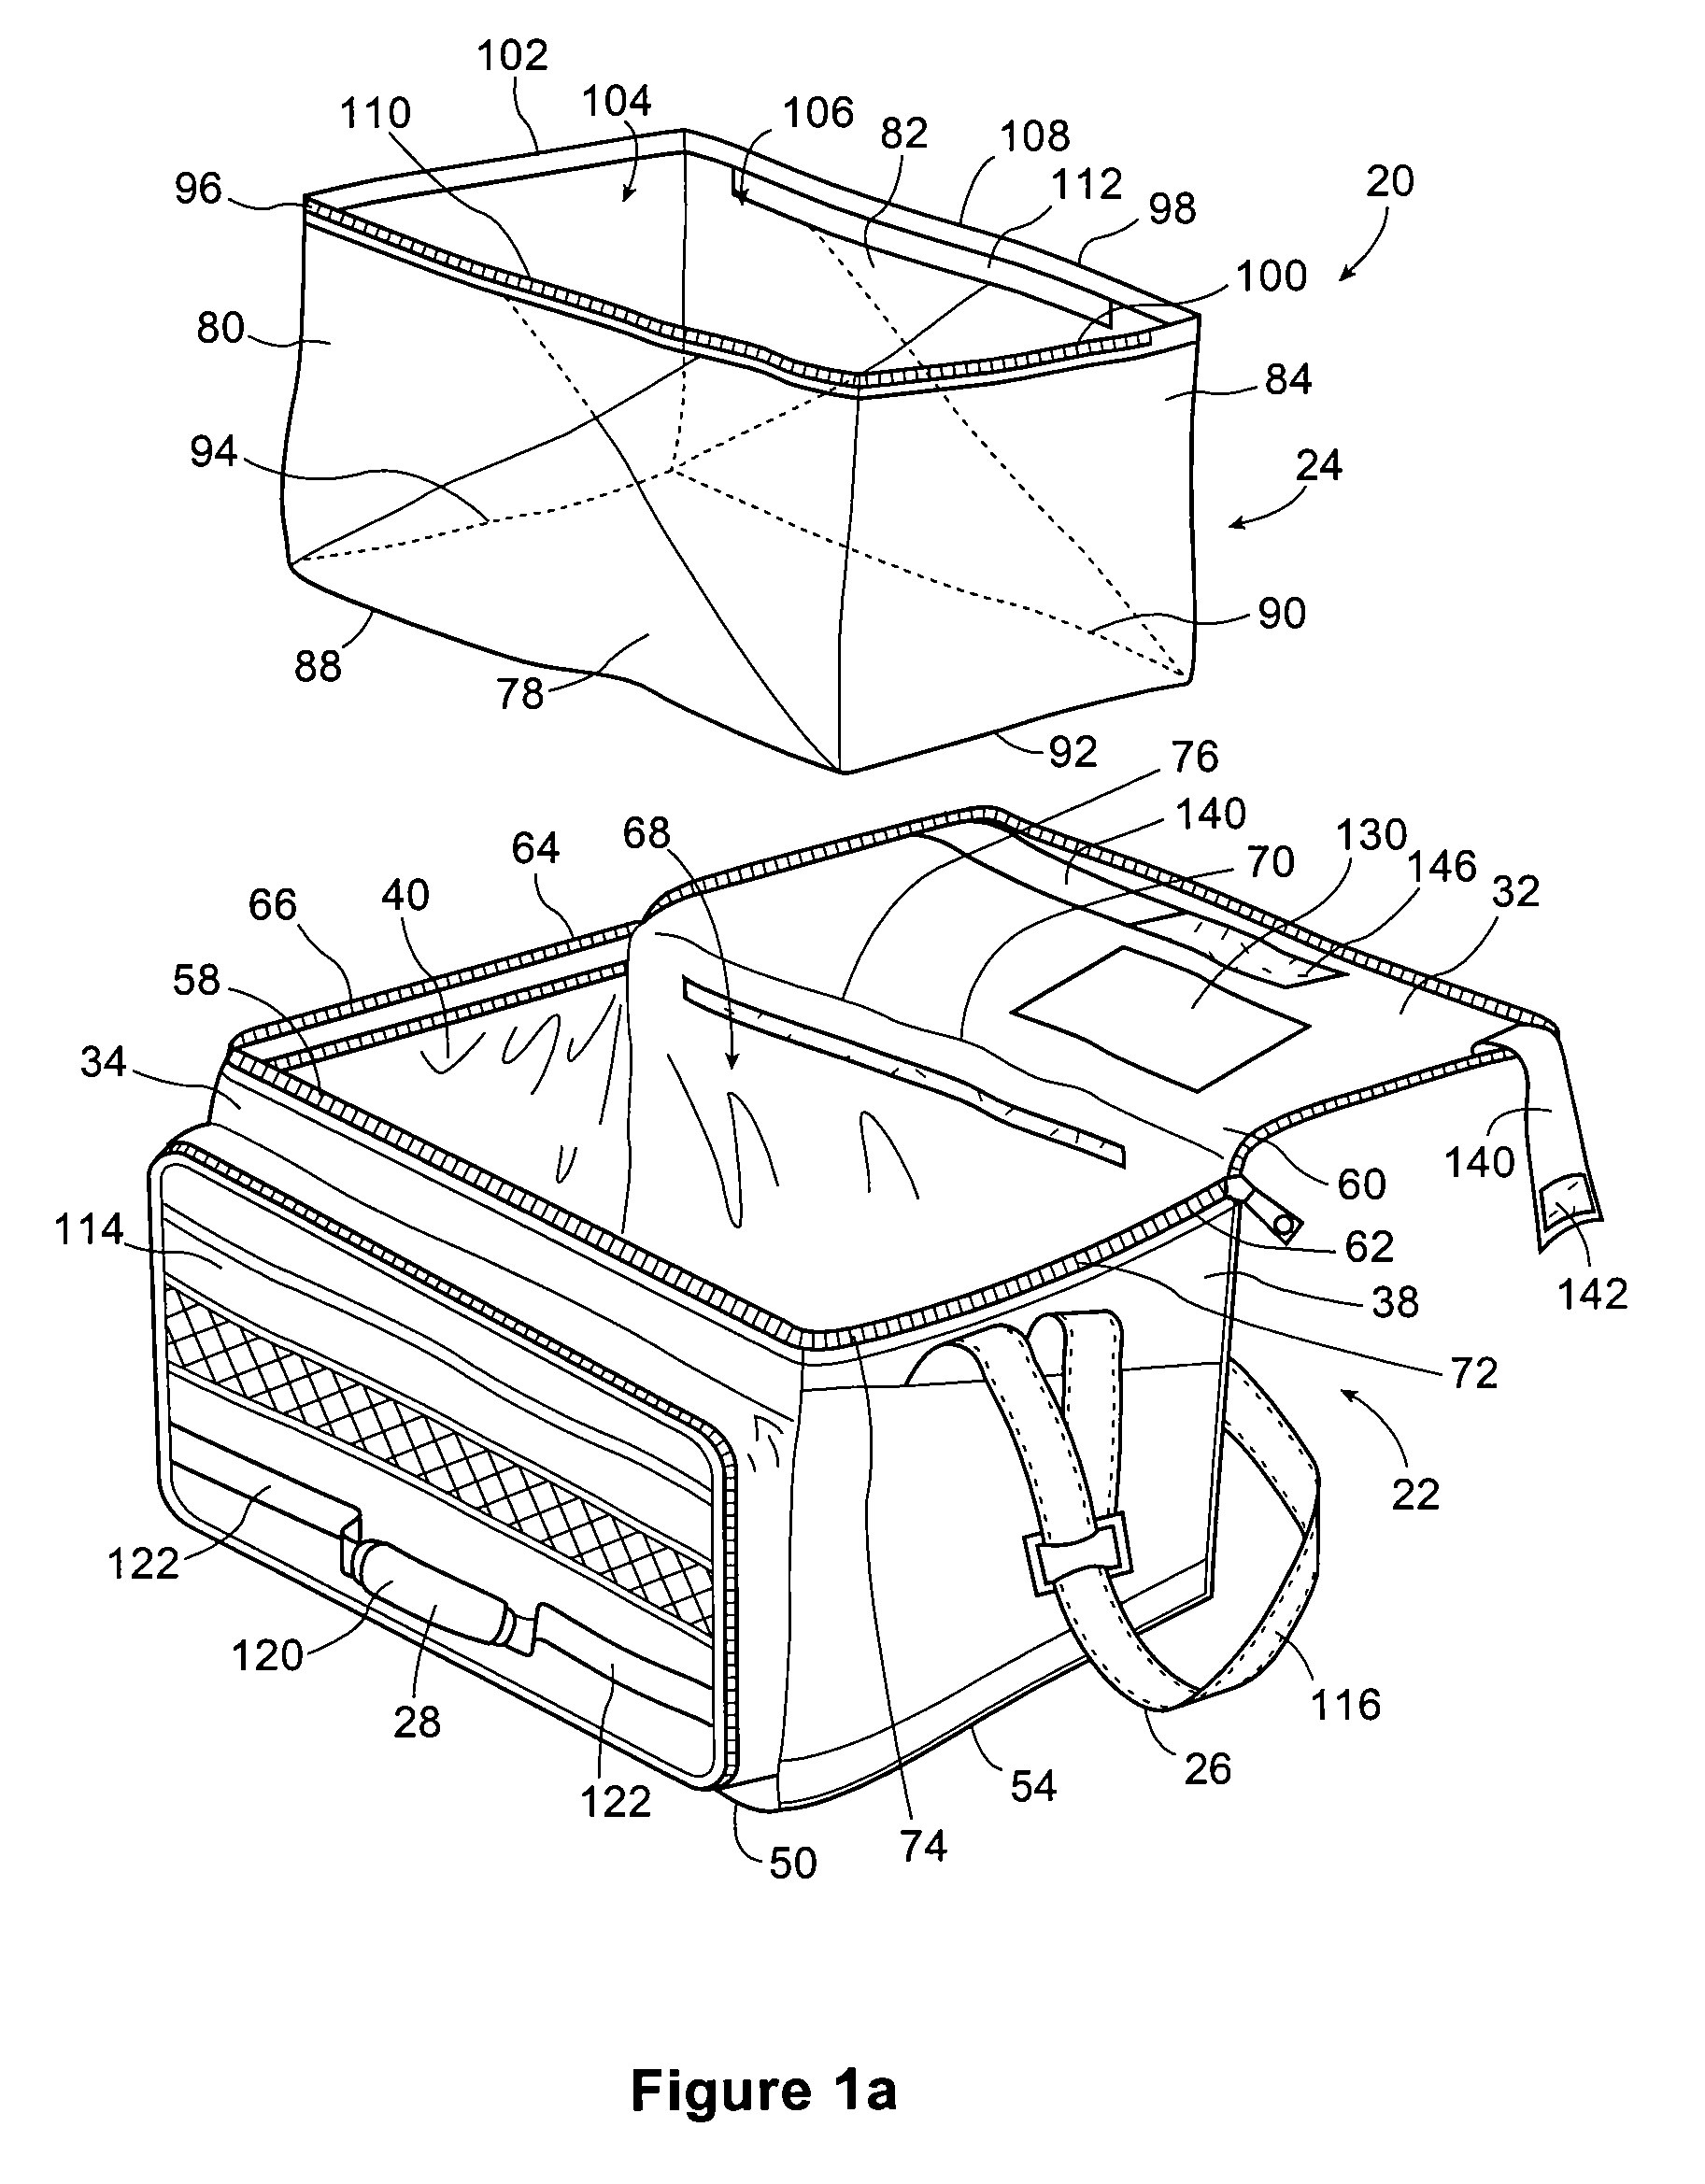 Insulated container with asymmetric lifting arrangement